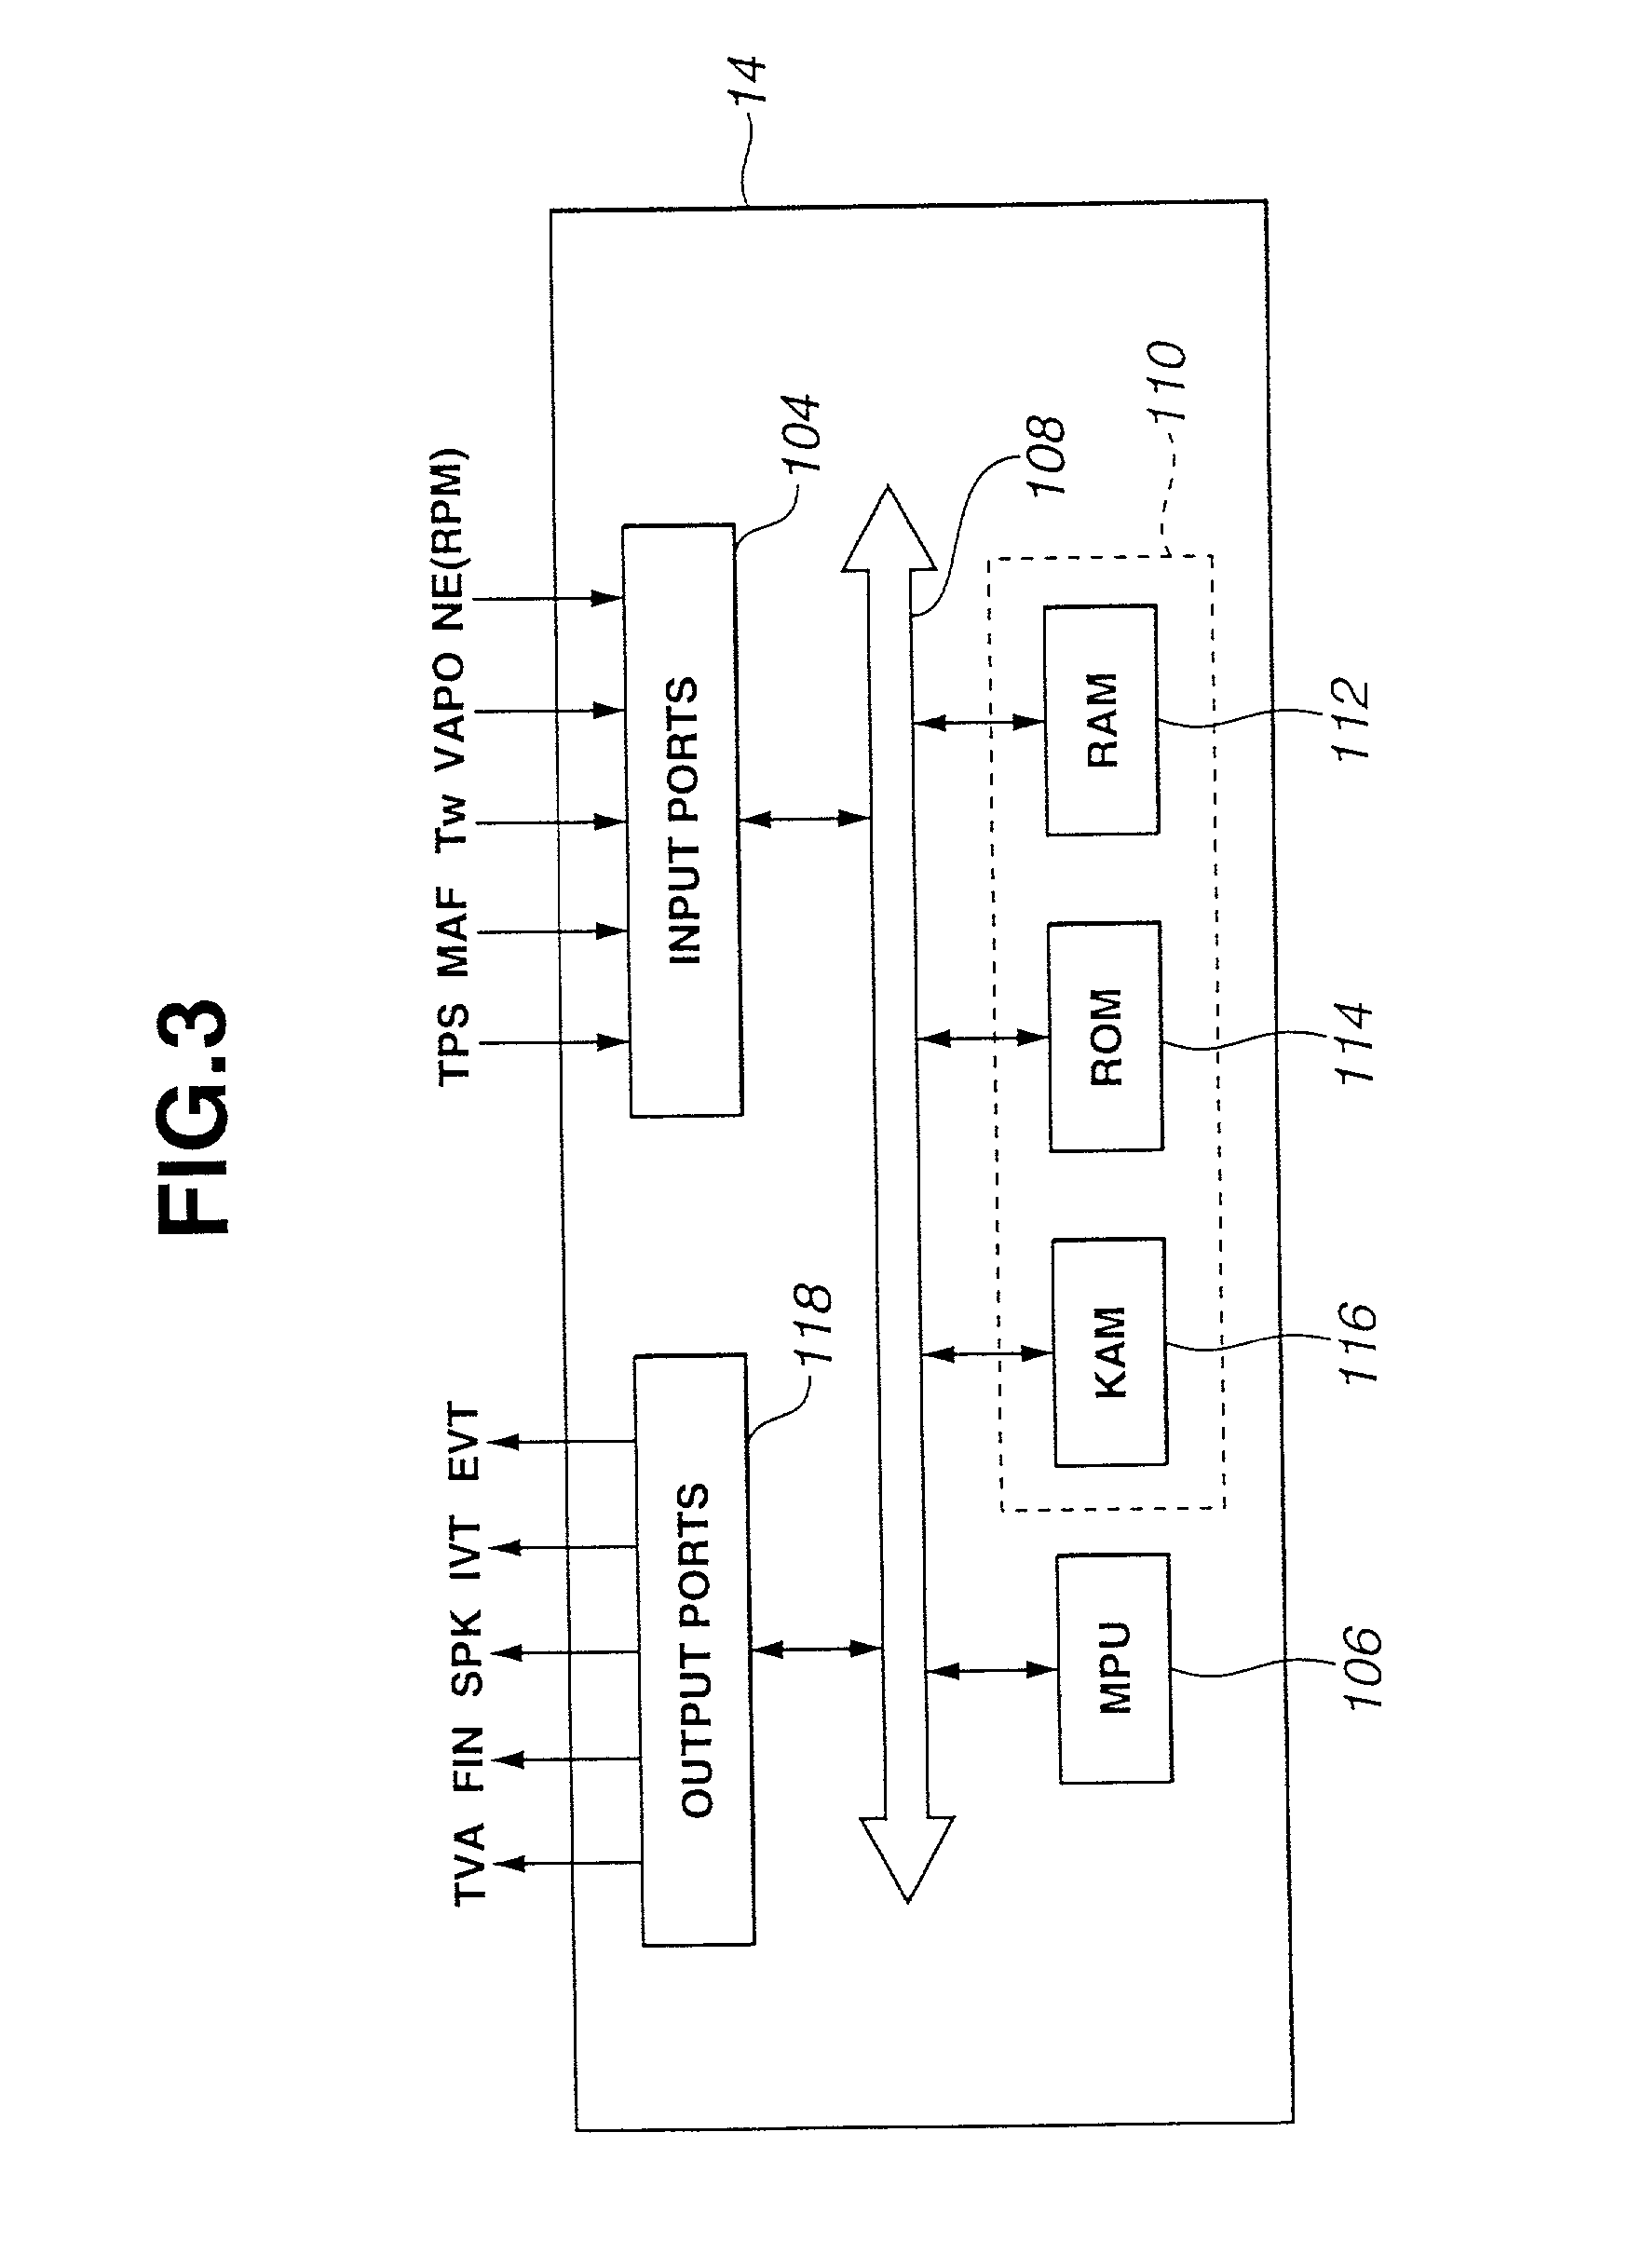 System and method for controlling intake air by variable valve timing